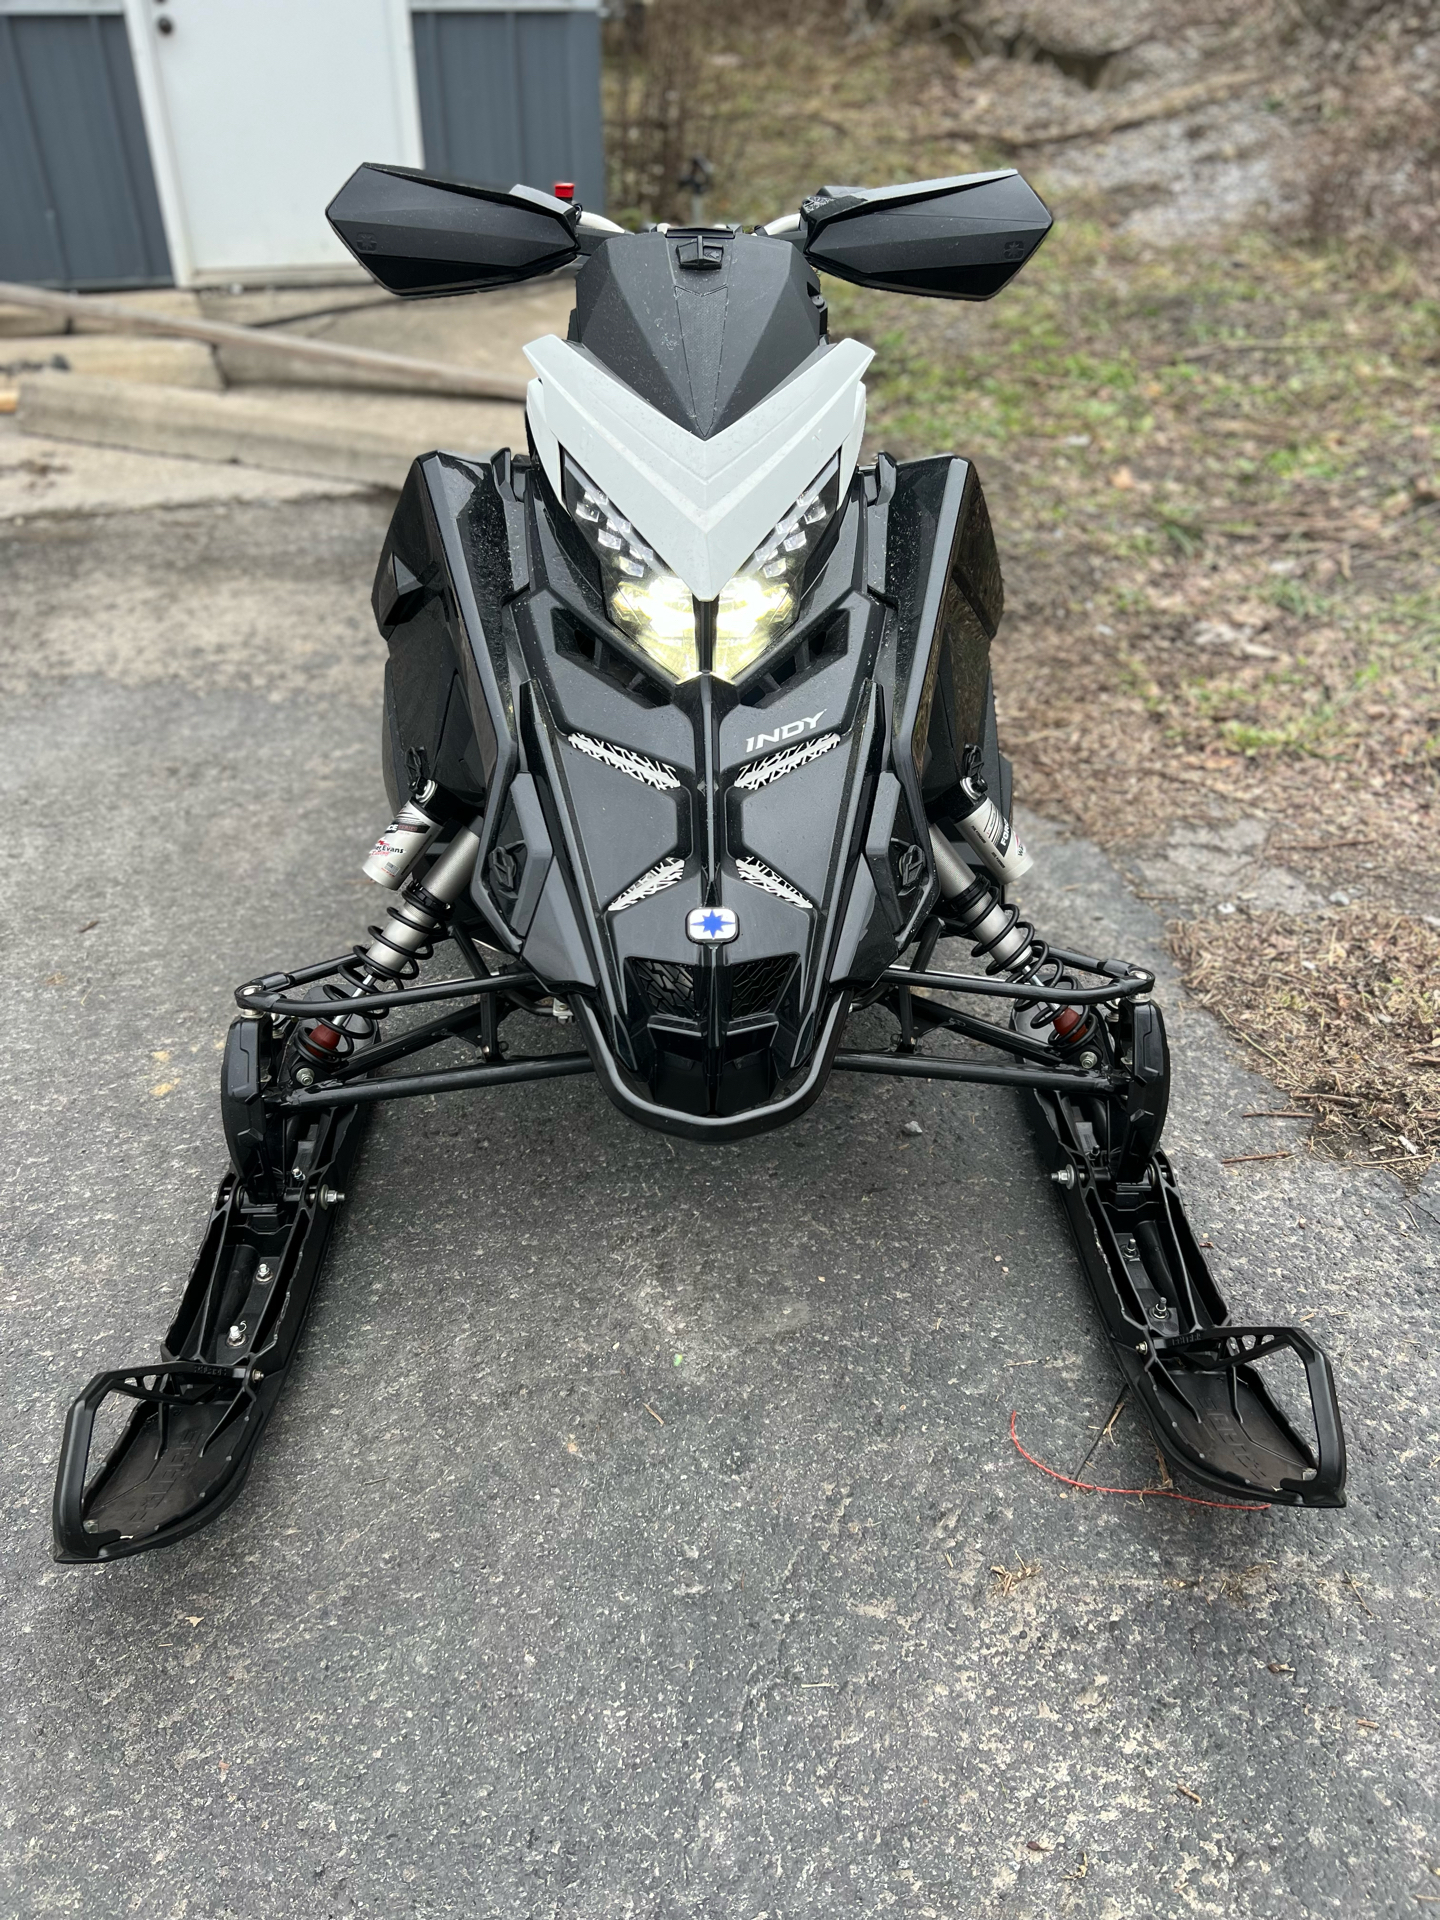 2021 Polaris 650 Indy XC 137 Launch Edition Factory Choice in Weedsport, New York - Photo 1